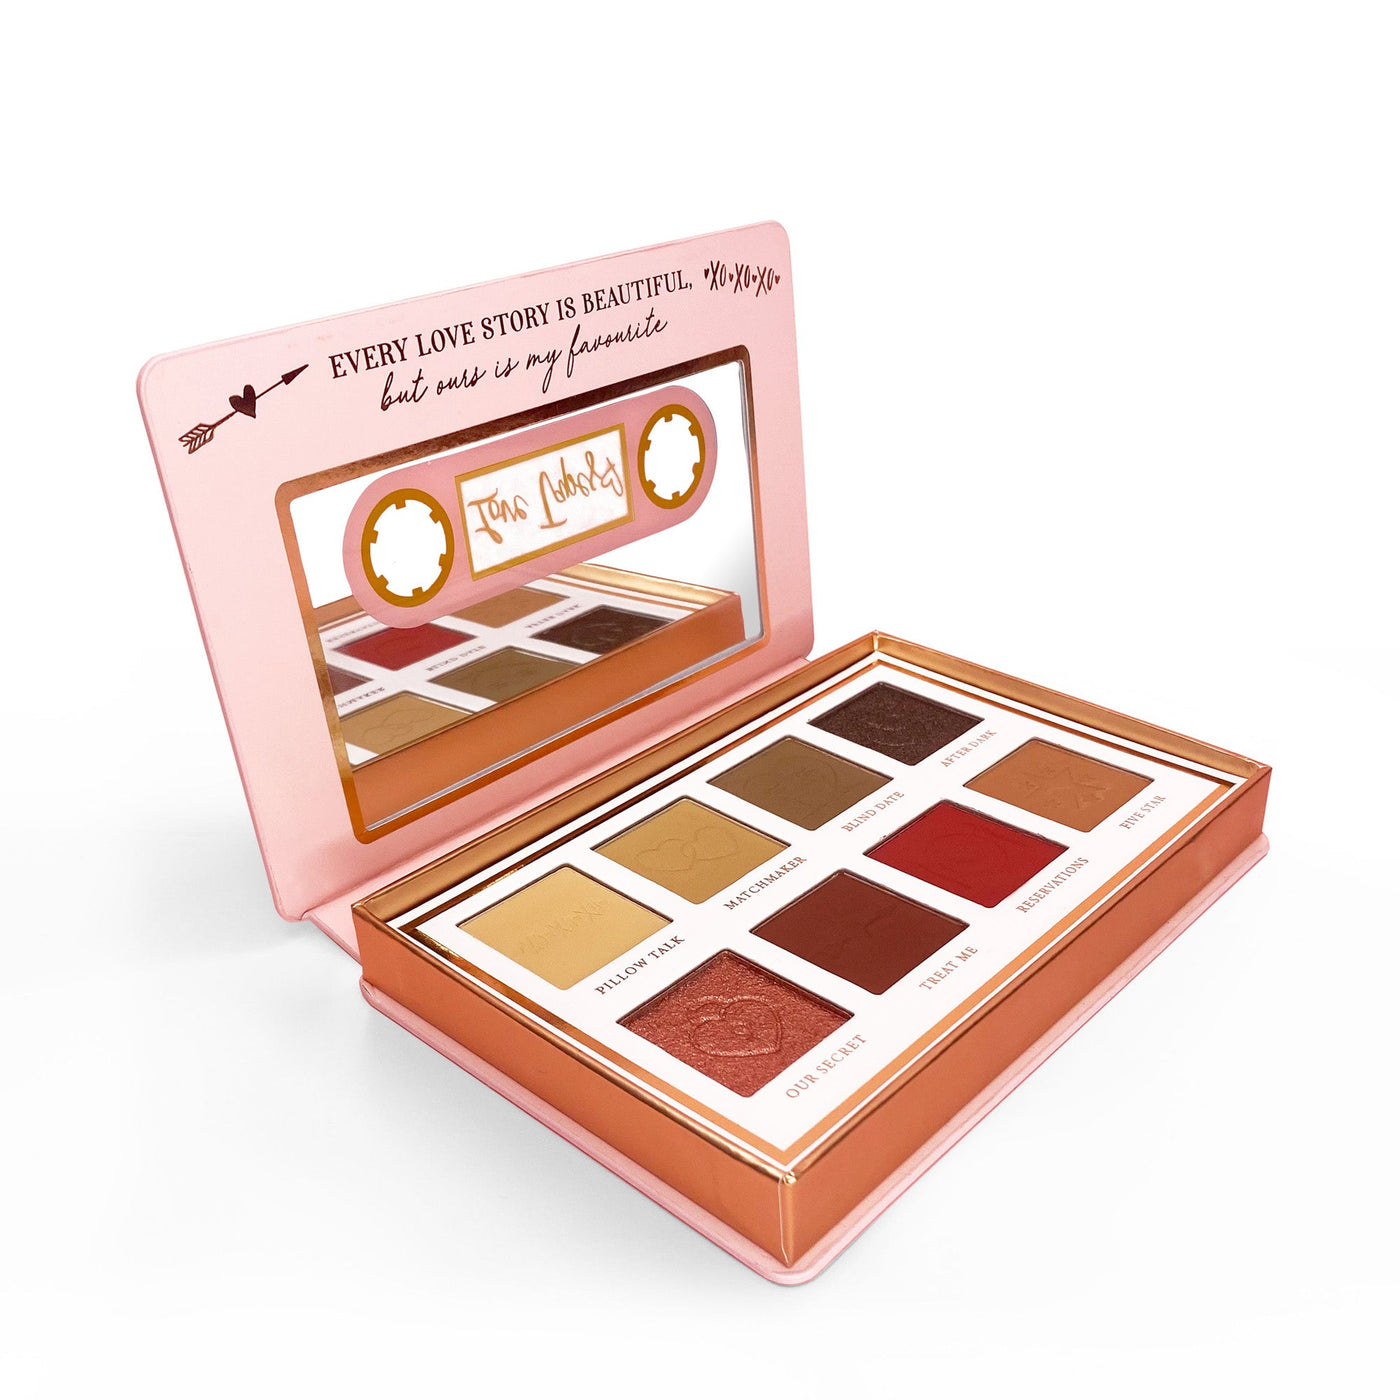 P.Louise - Love Tapes Eyeshadow Palette - Date Night